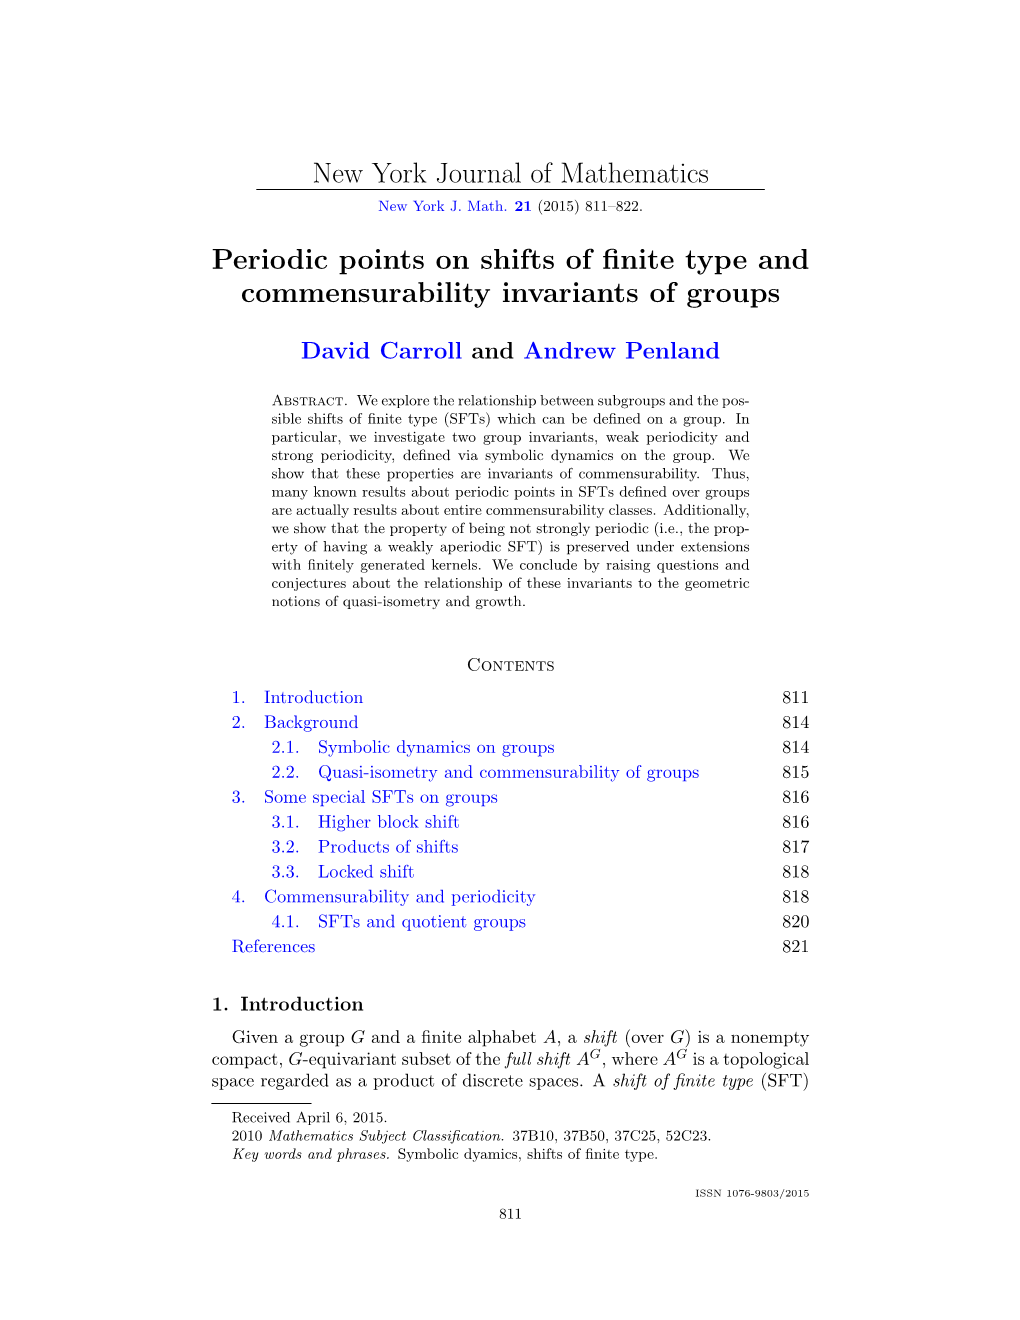 New York Journal of Mathematics Periodic Points on Shifts of Finite Type and Commensurability Invariants of Groups